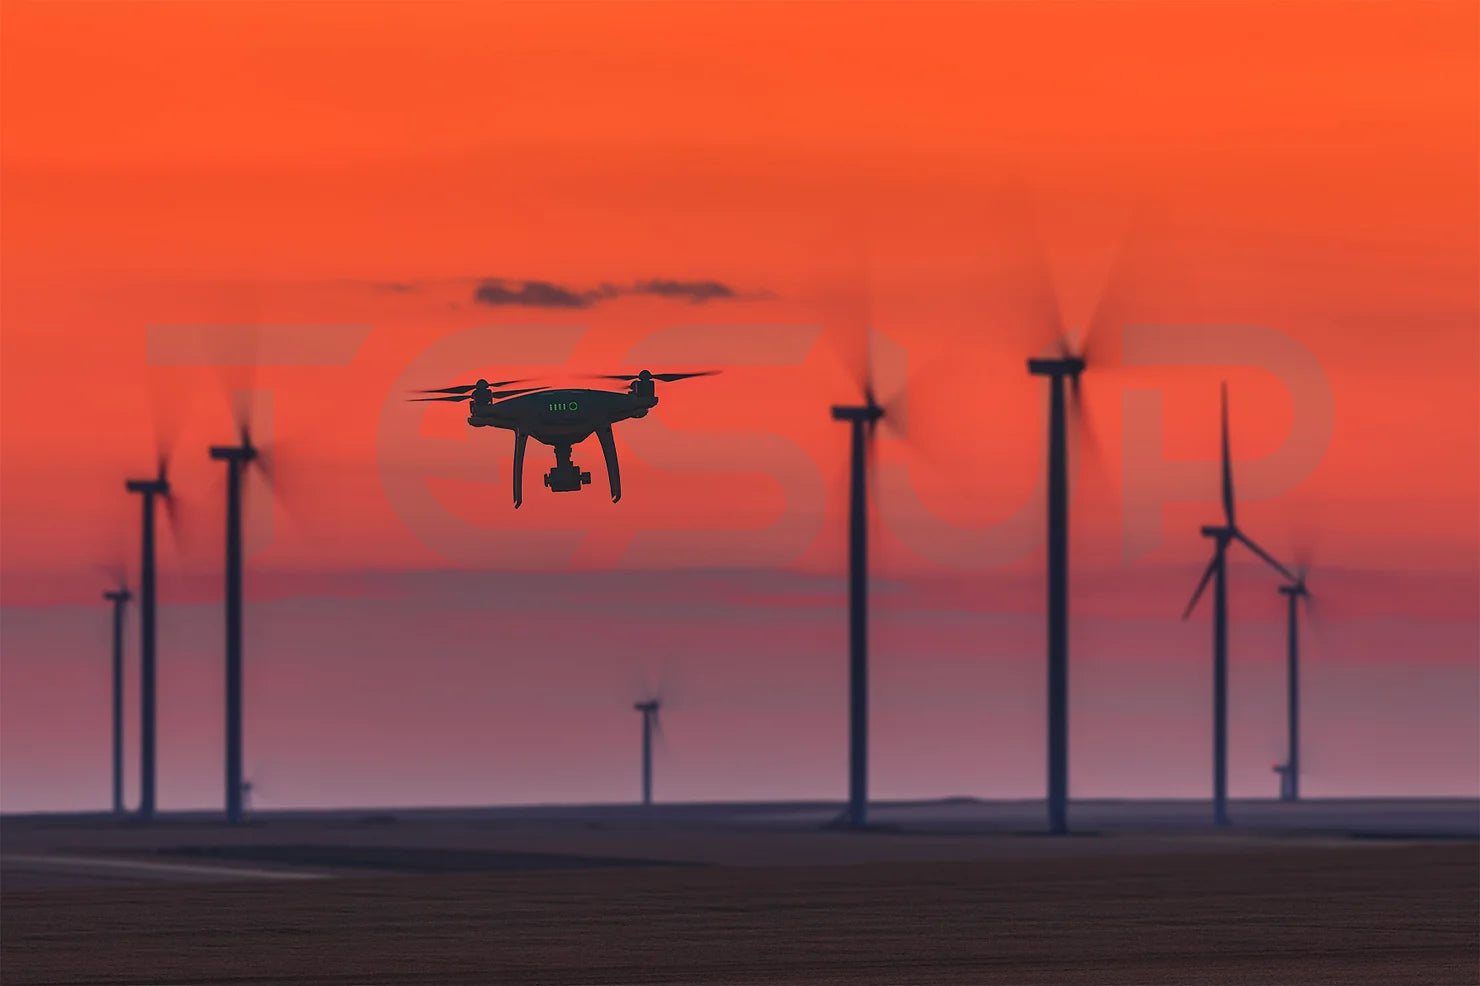 The New Technology in Energy Sector: Drone Thermal Recordings